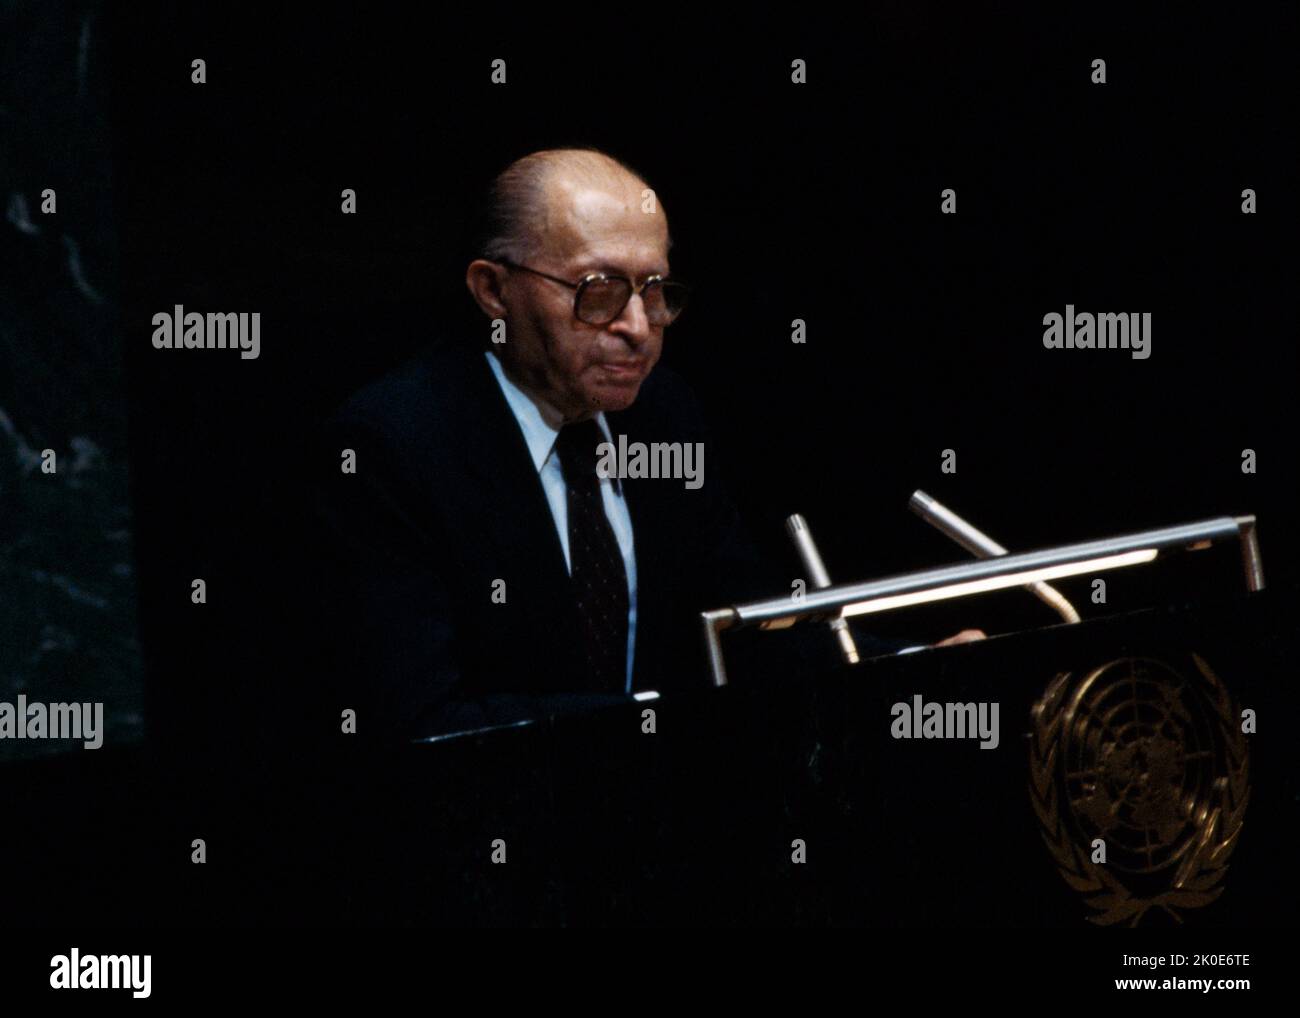 Menachem Begin (1913 - 1992) Israeli politician, founder of Likud and the sixth Prime Minister of Israel. Stock Photo